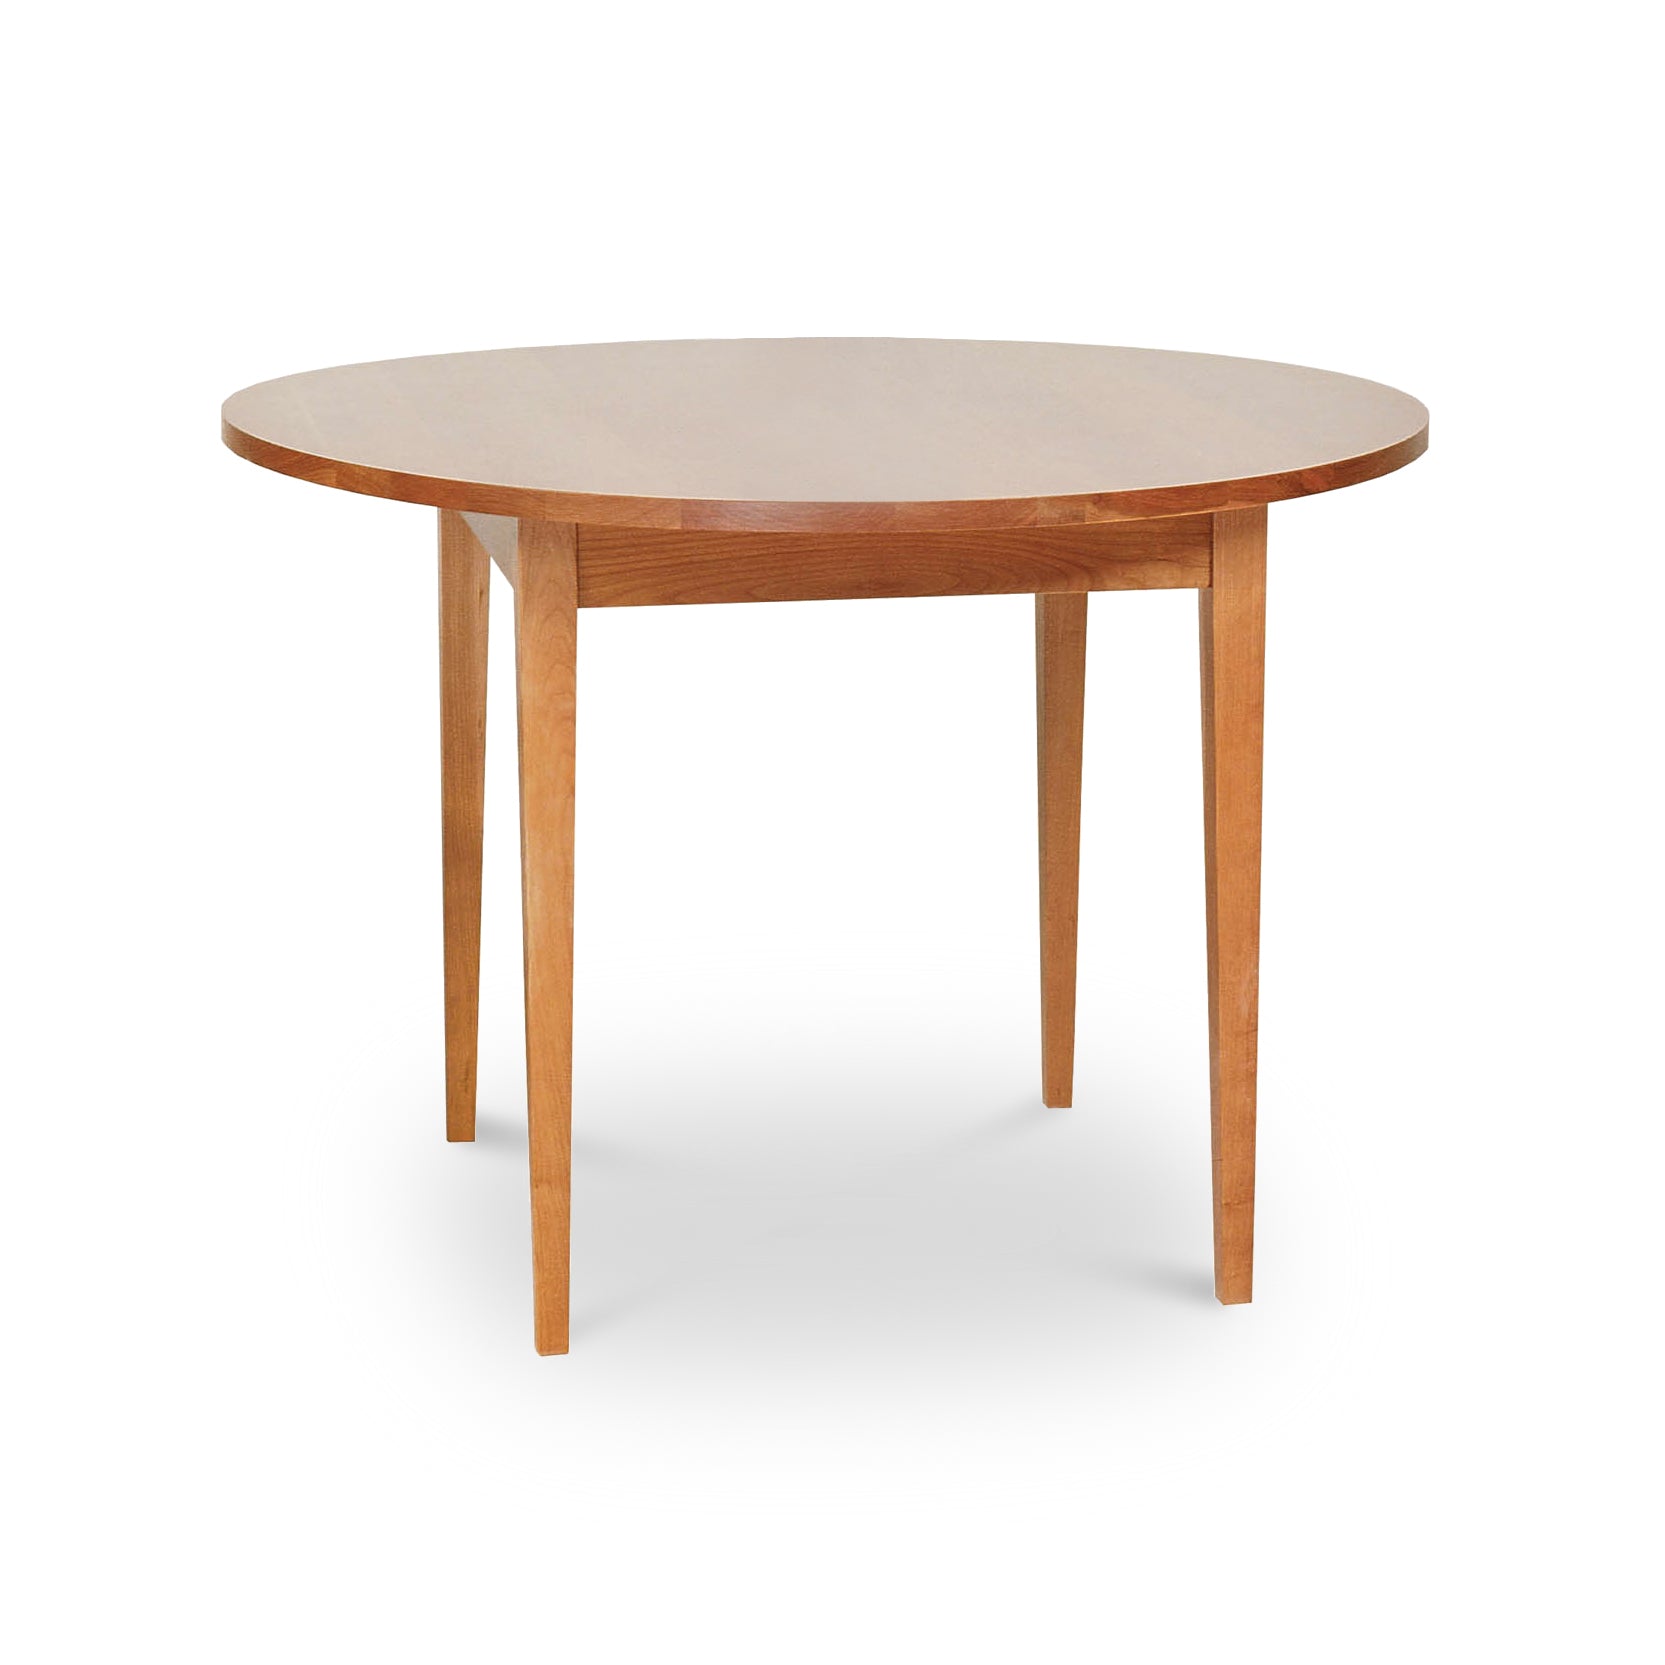 A Classic Shaker Round Solid Top Dining Table, handmade by Lyndon Furniture in Vermont, with wooden top and legs.